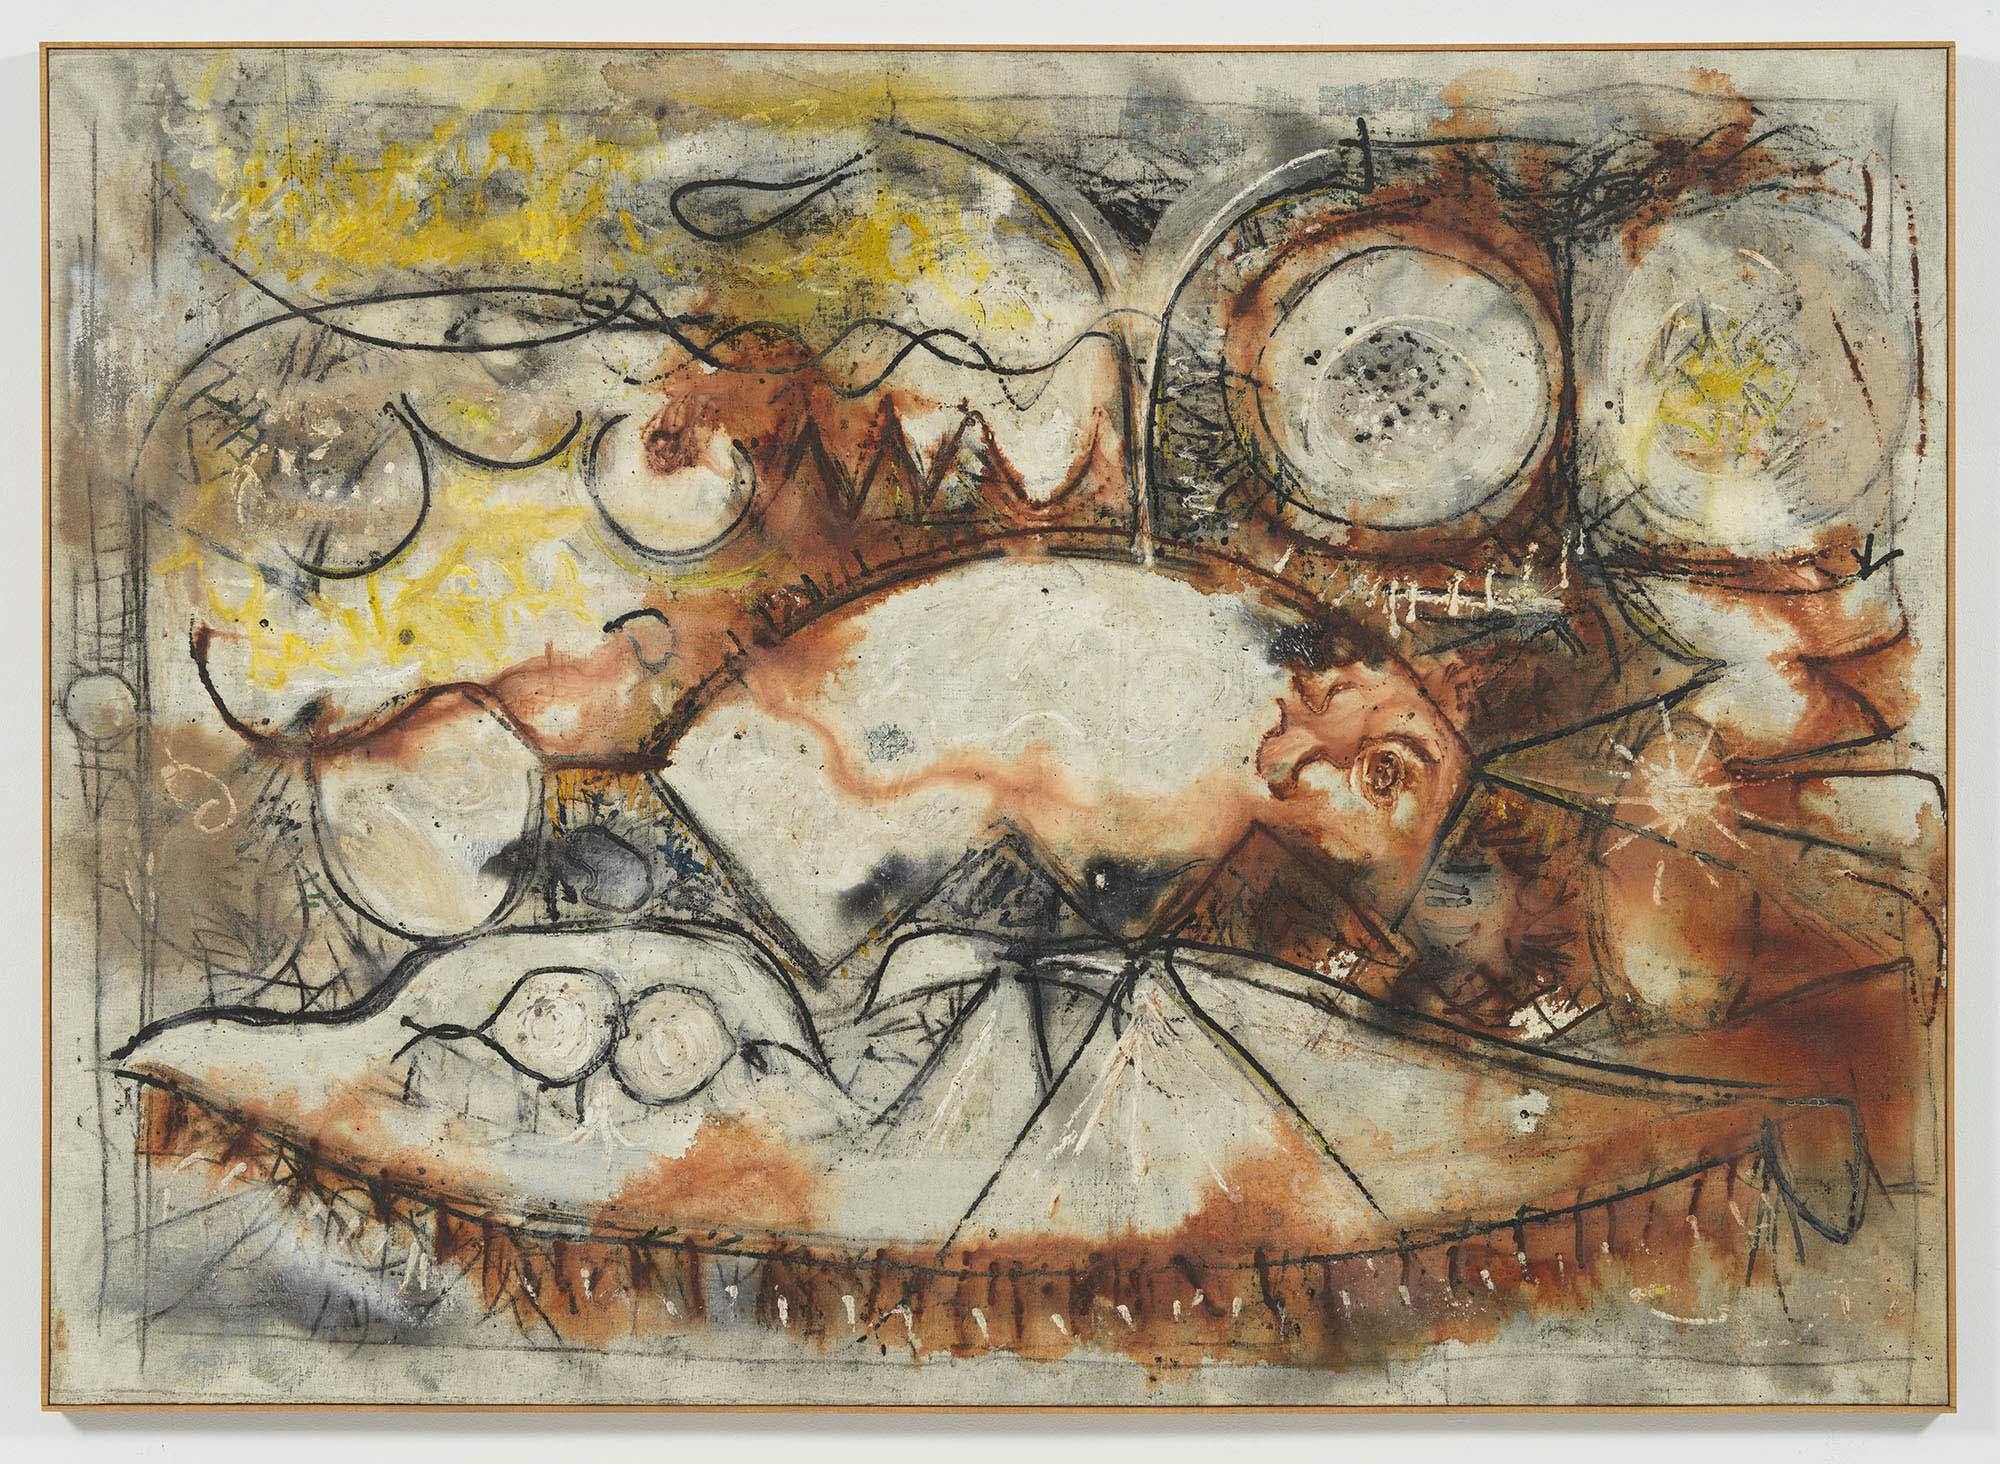 Sea Birth
1950
Oil on linen
56 x 78 1/2 in. (142.2 x 199.4 cm)
 – The Richard Pousette-Dart Foundation